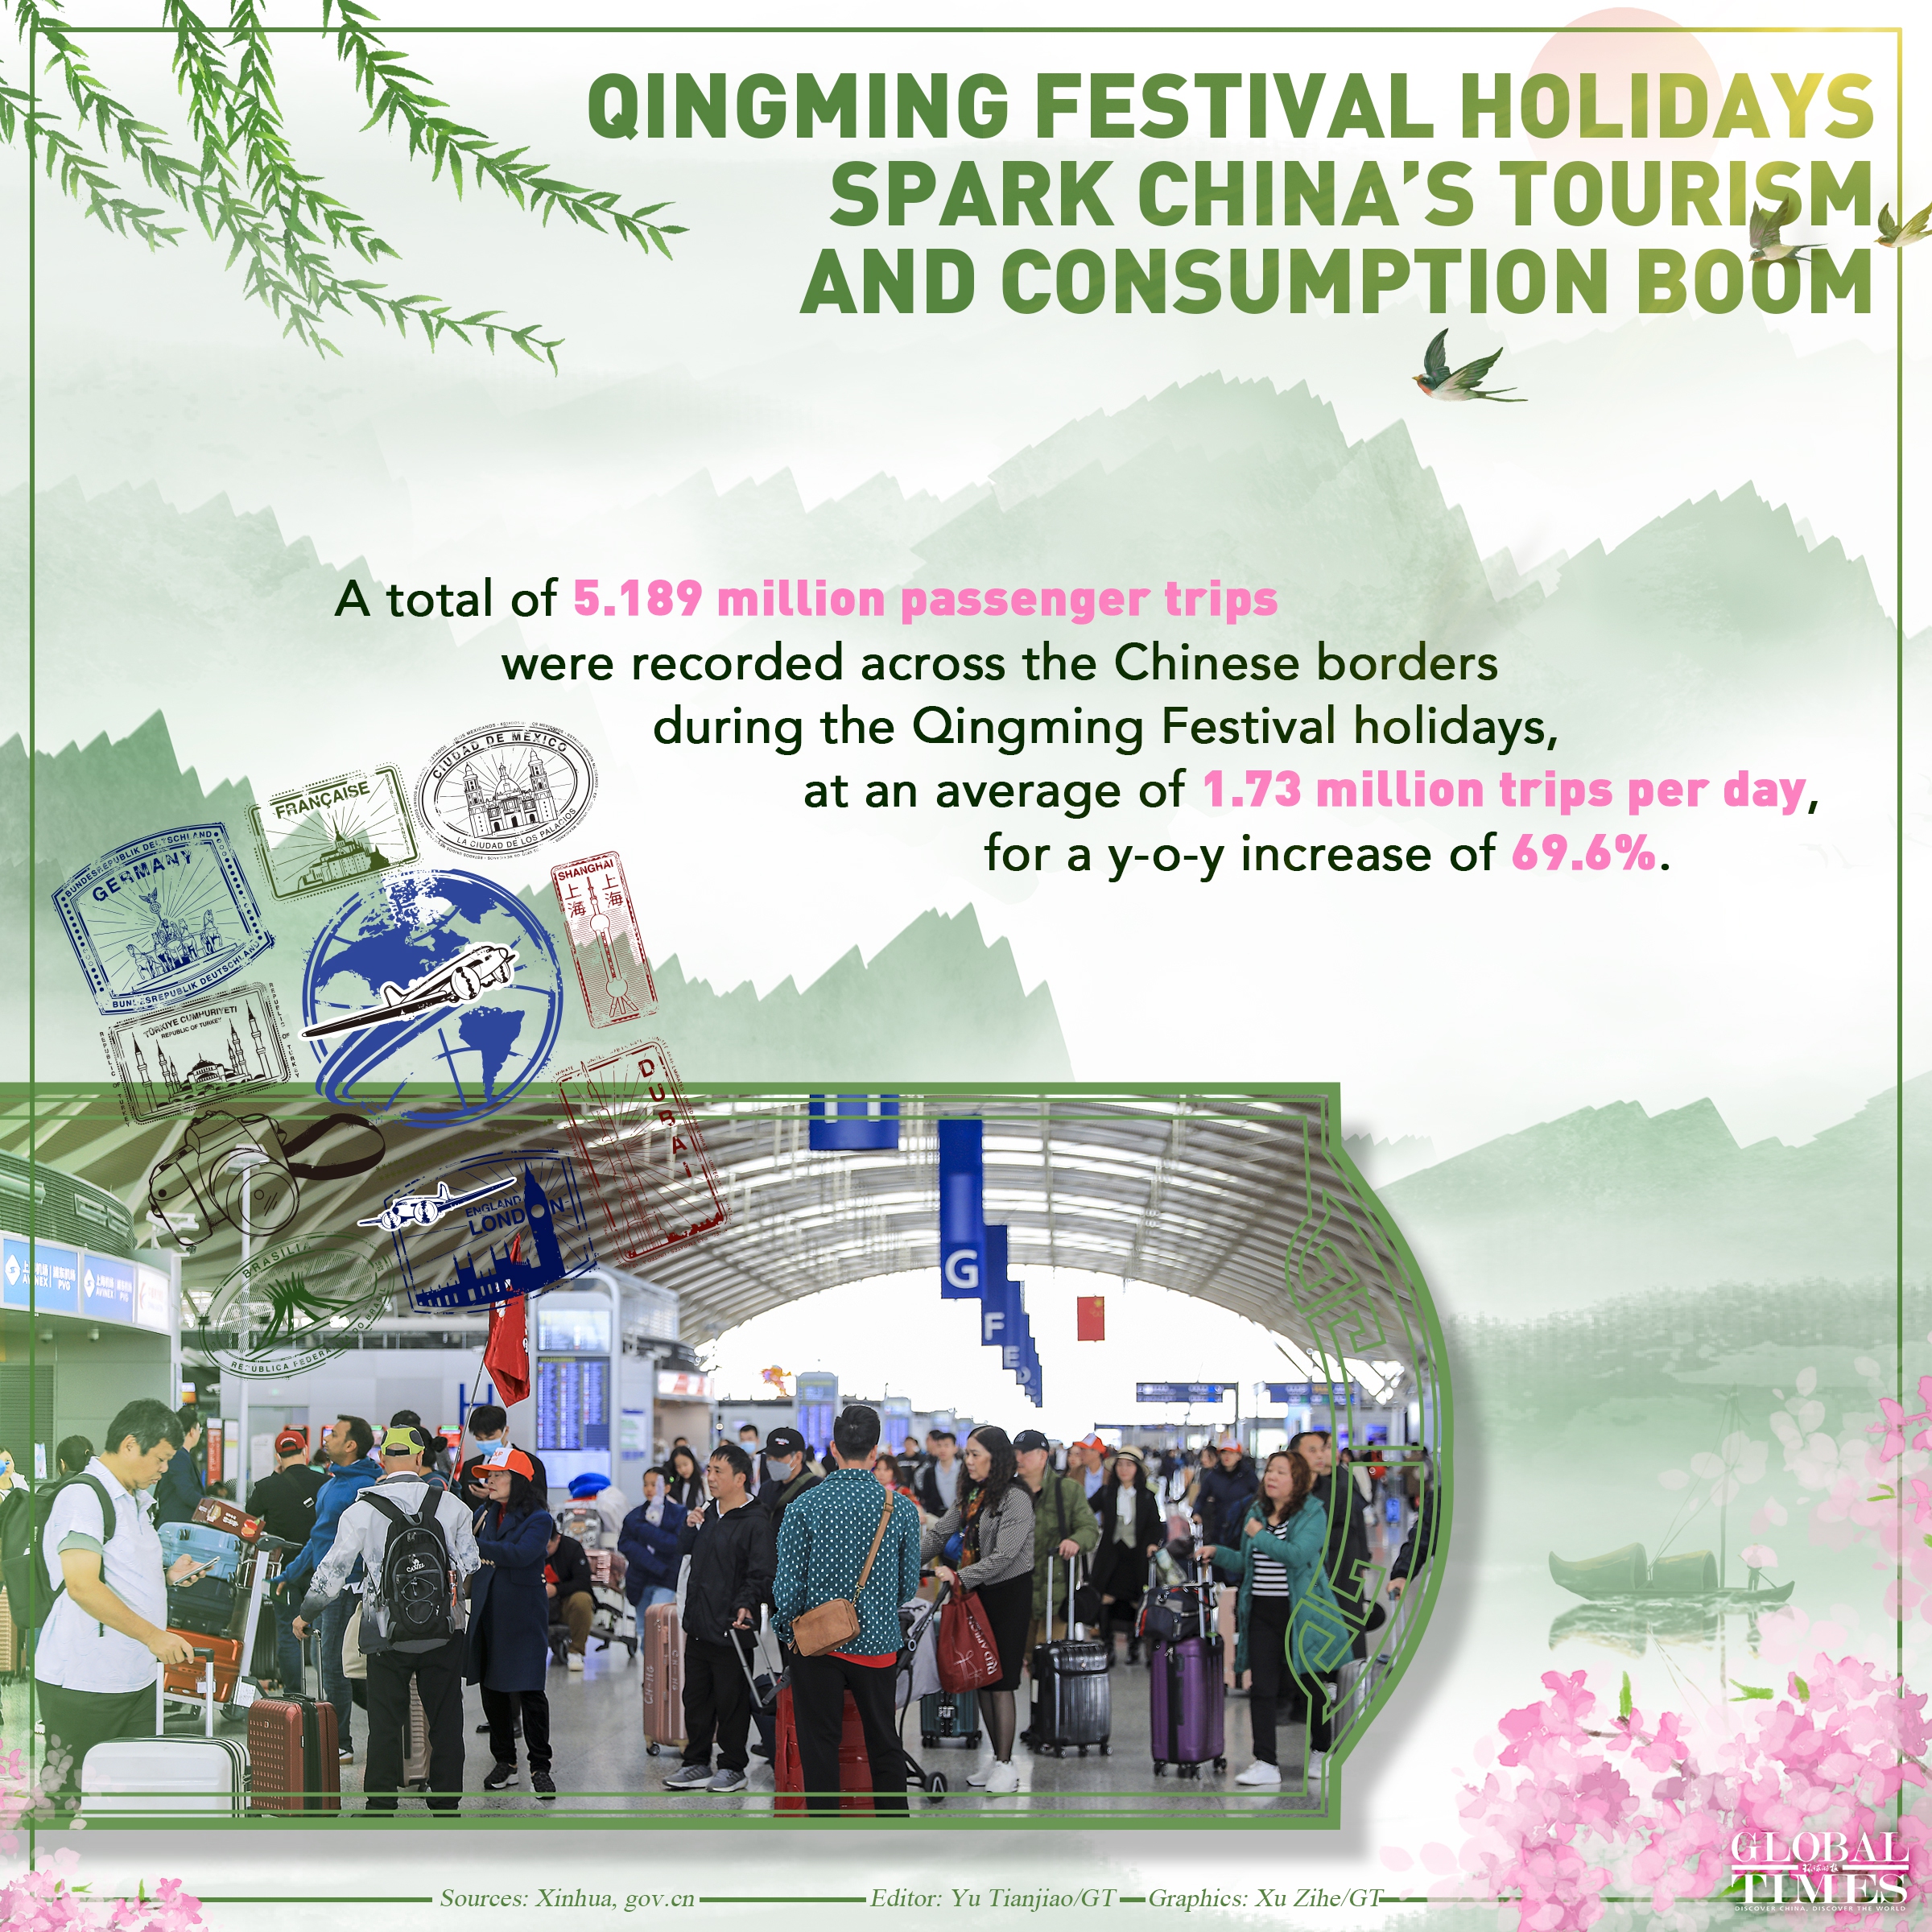 China saw 119 million domestic tourist trips during the just-ended Qingming Festival holidays (April 4-6), an increase of 11.5% from the same period in 2019. The better-than-expected performance underscored the strong vitality and potential of Chinese economy.